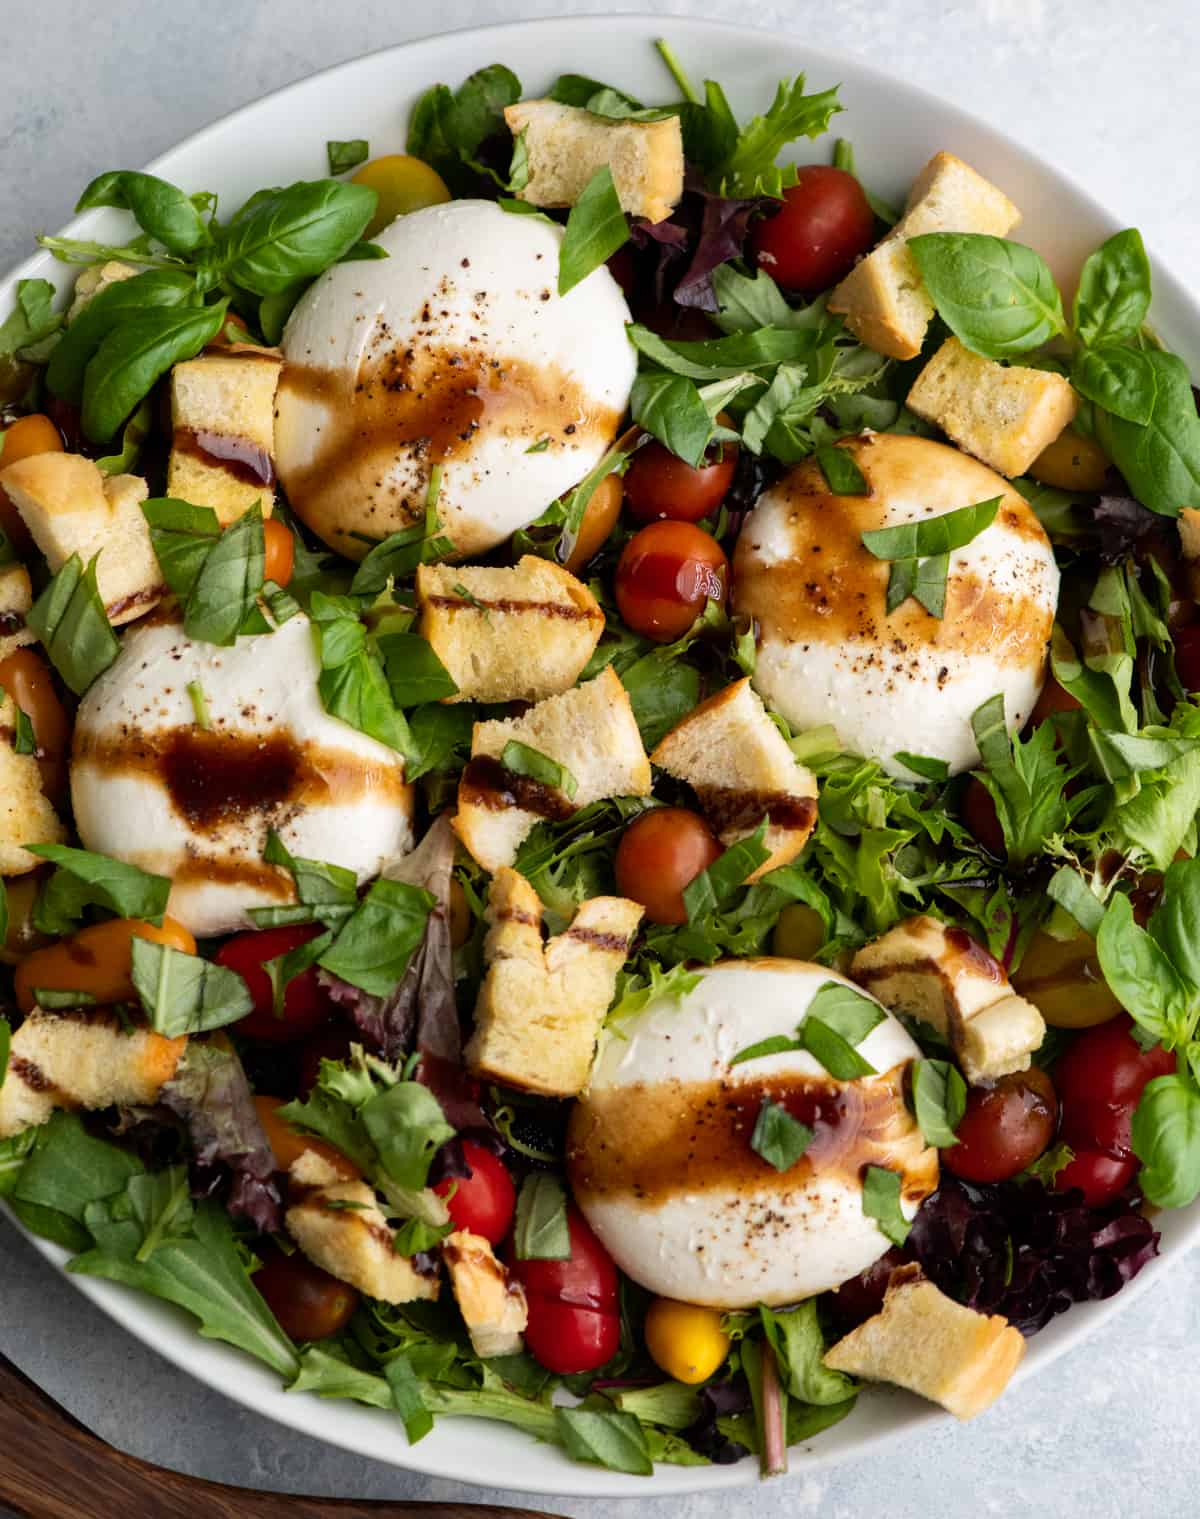 burrata salad in a large white serving dish drizzled with balsamic vinaigrette